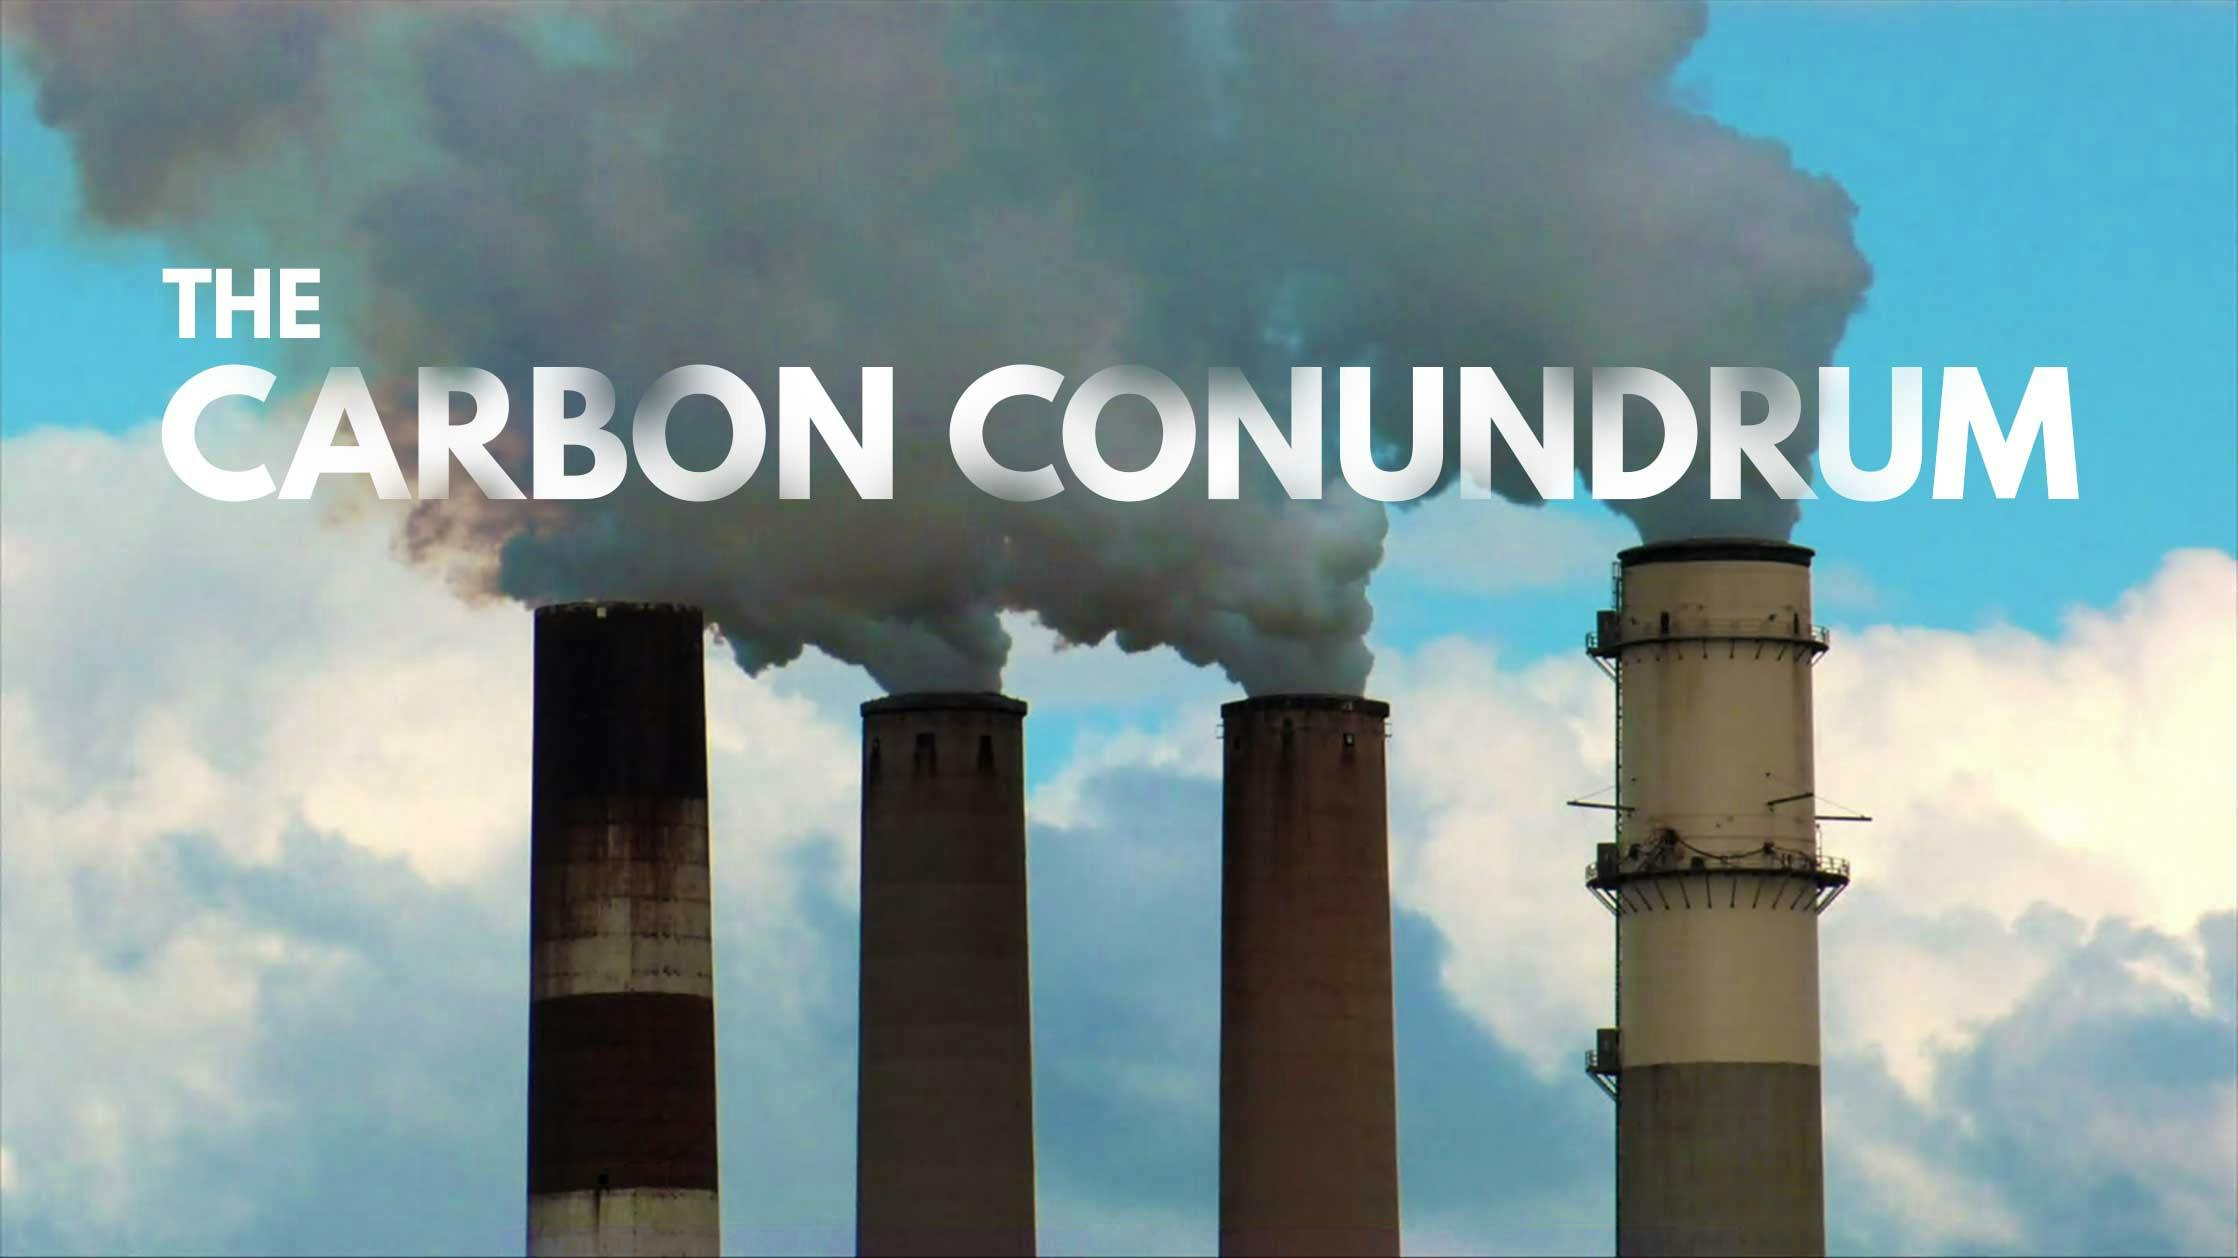 The Carbon Conundrum